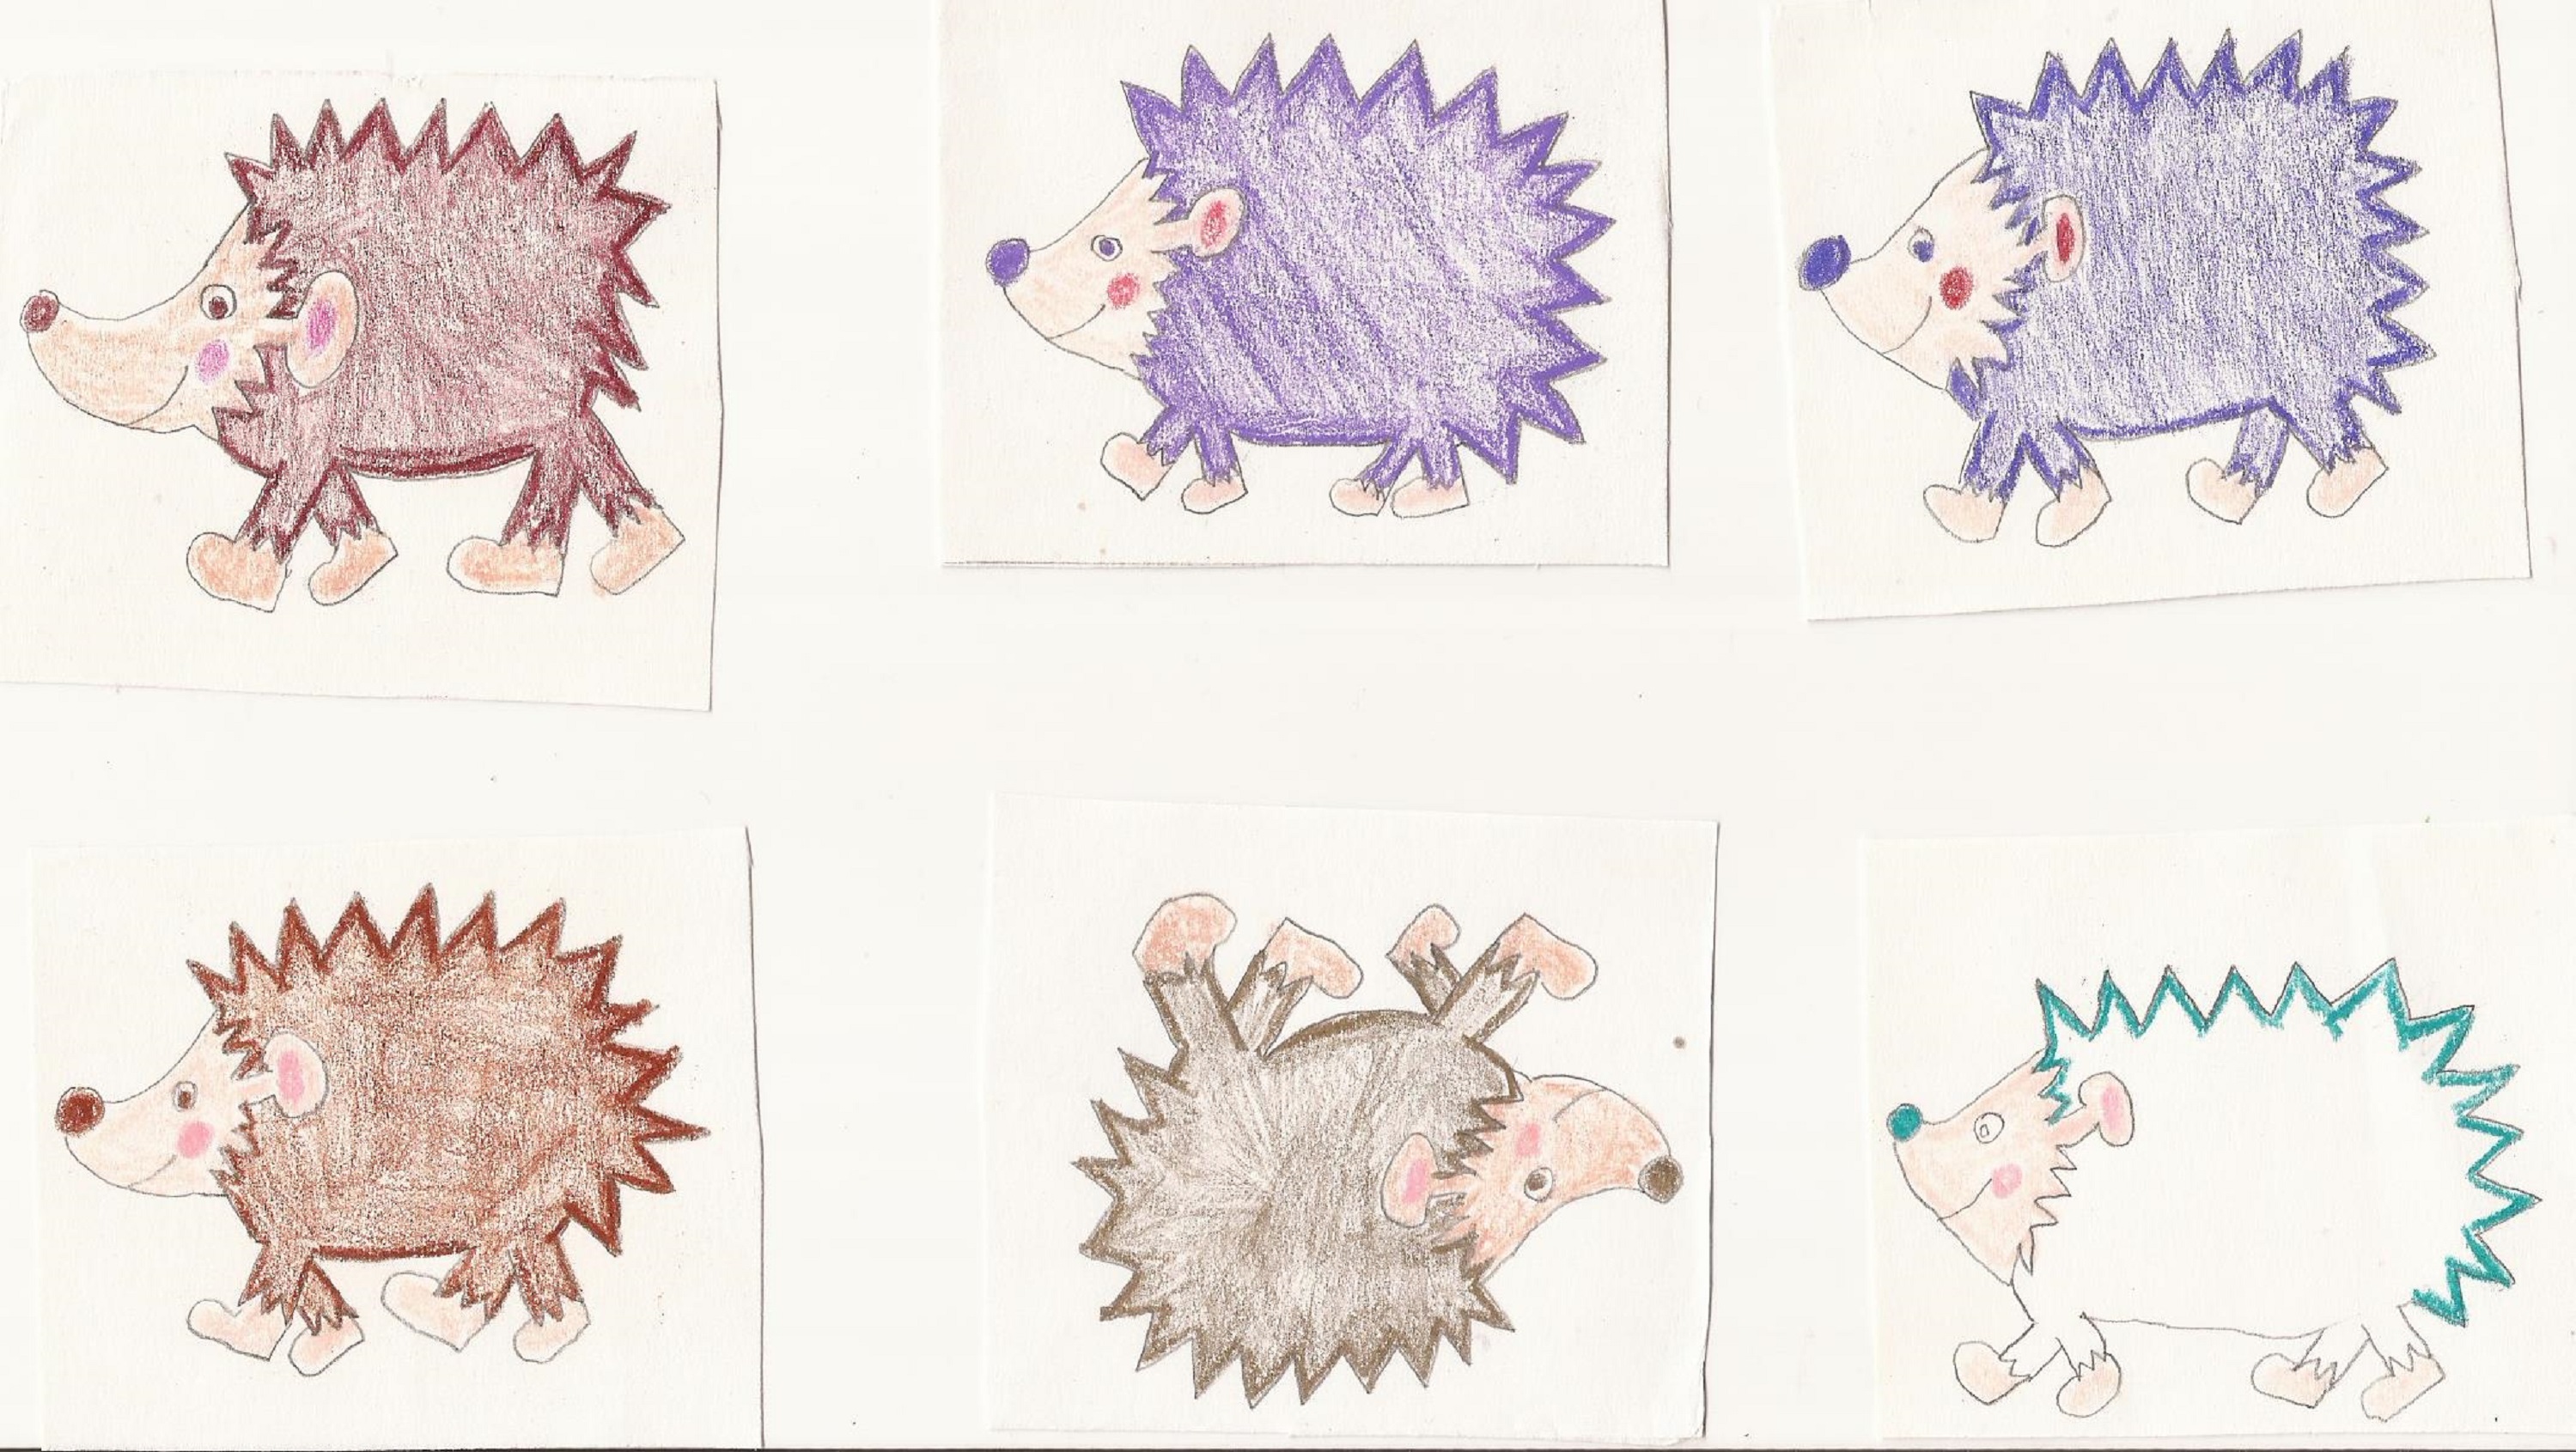 Scan of the Hedgehog cards that I drew and mostly colored this evening.